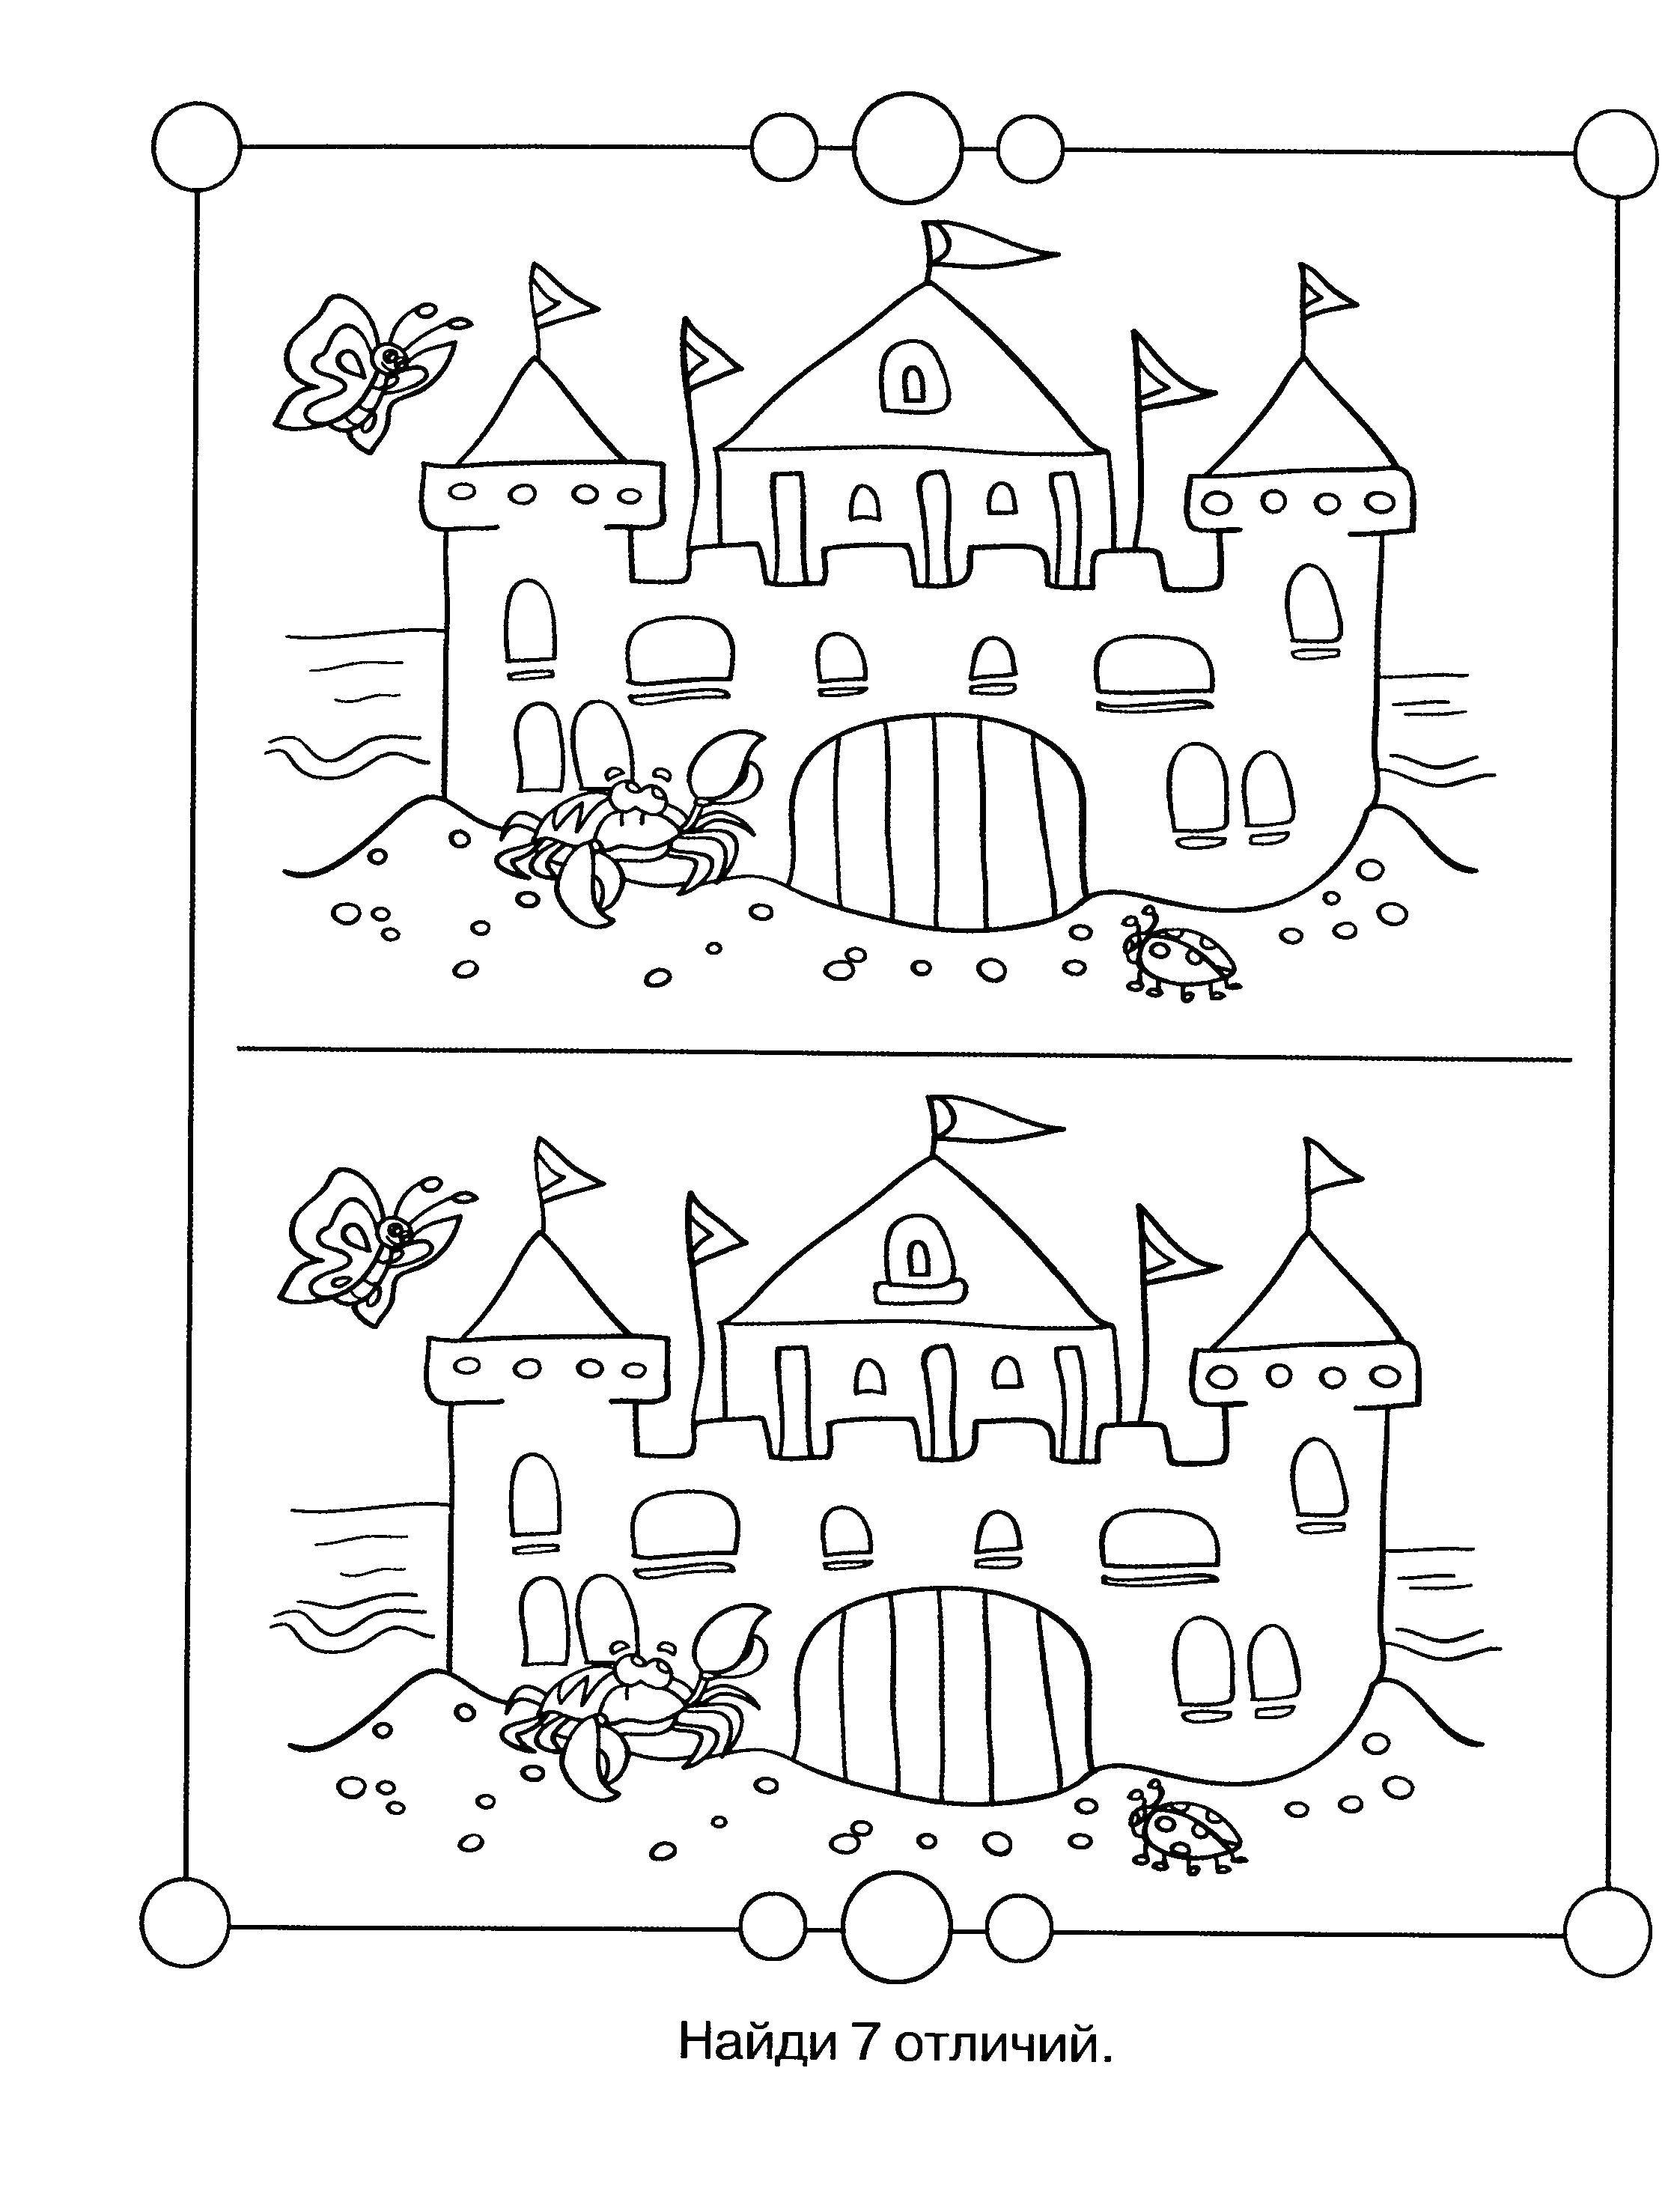 Coloring Spot the difference castles. Category riddles for kids. Tags:  Teaching coloring, logic.